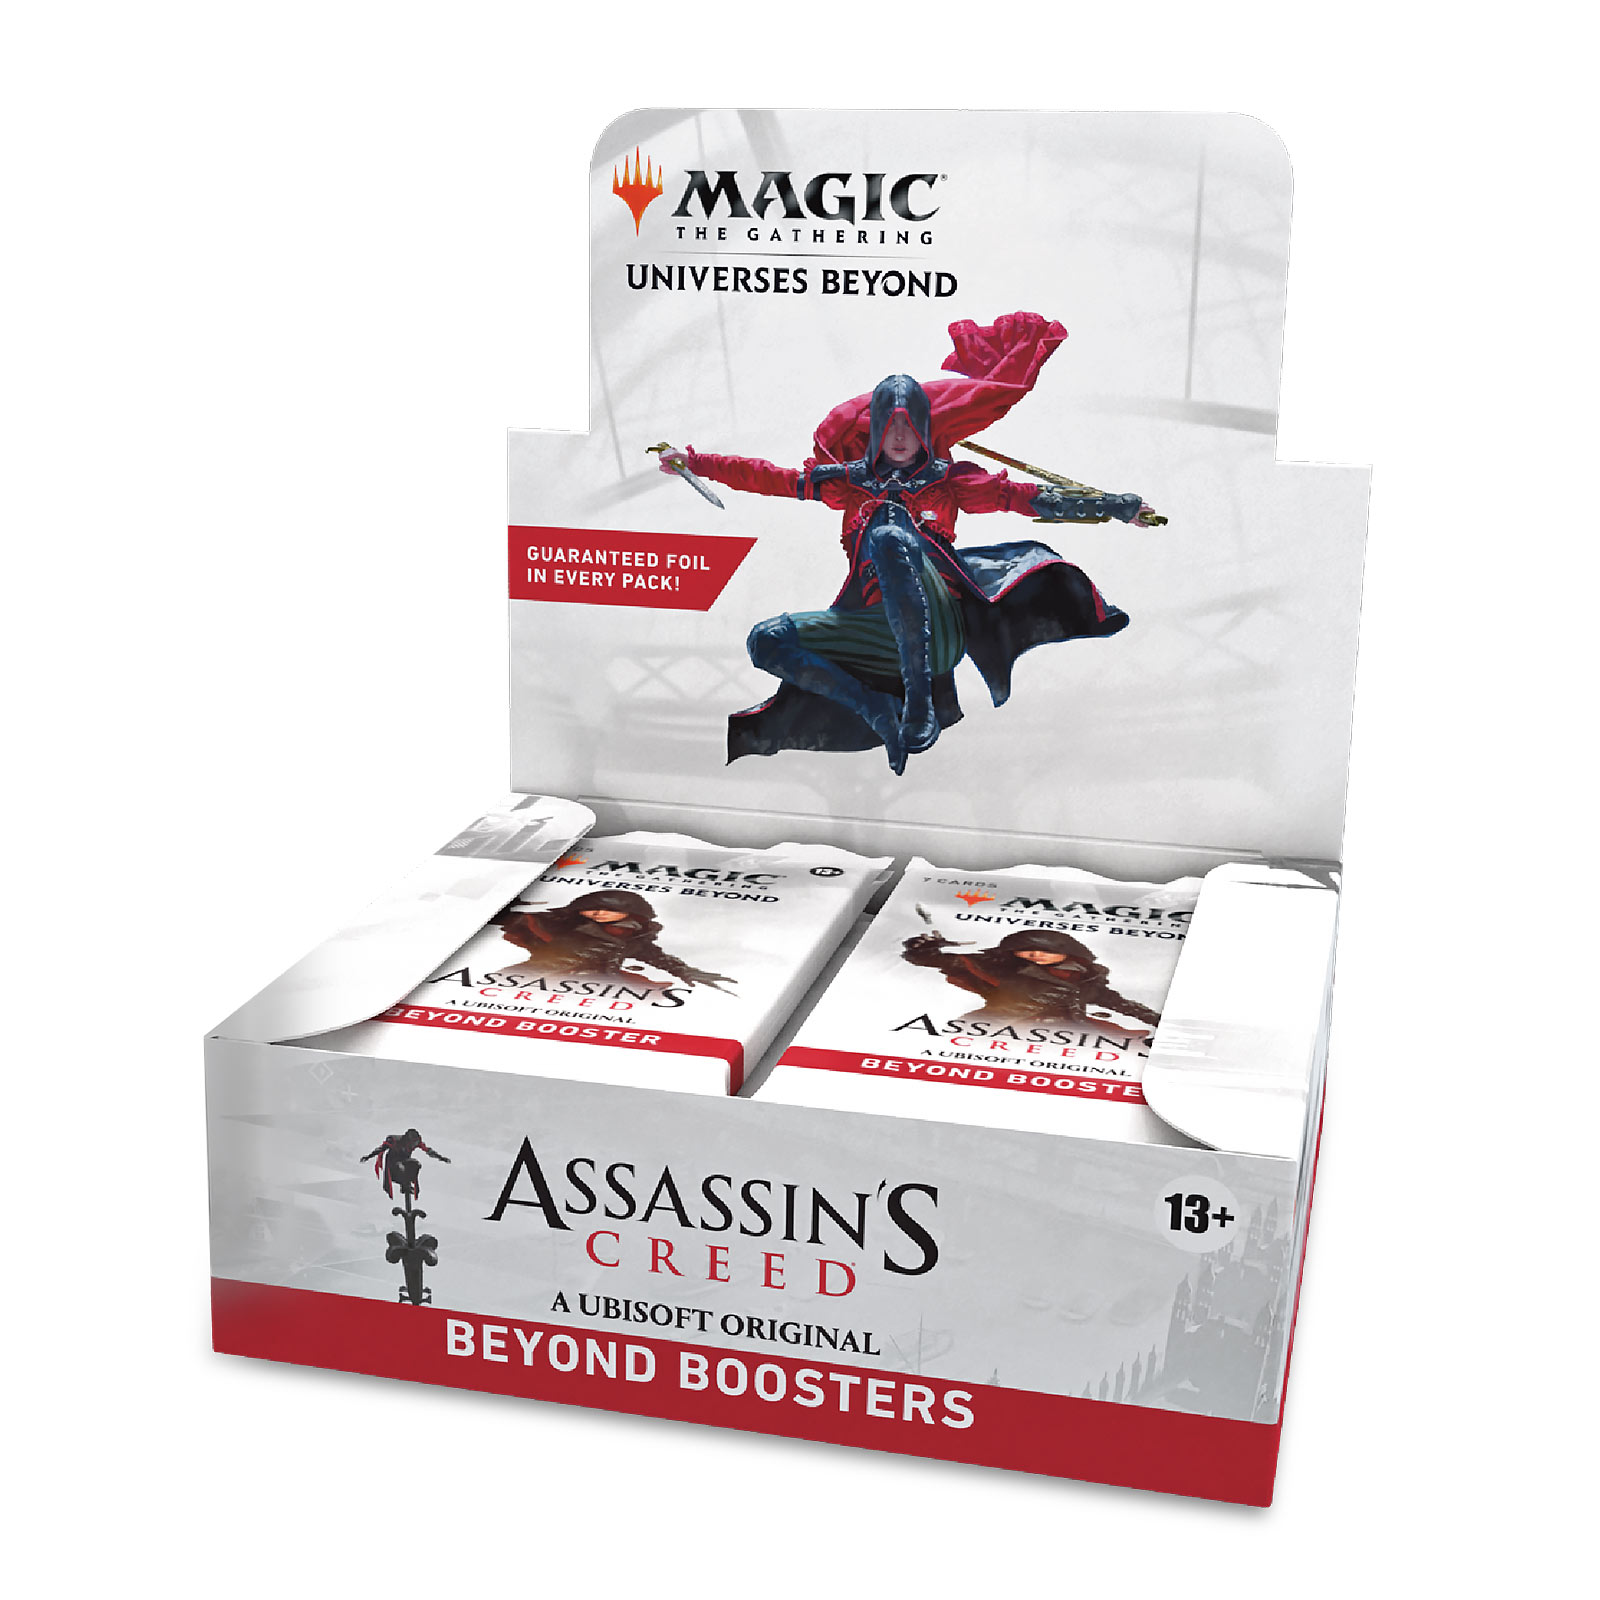 Assassin's Creed Beyond Booster Display - Magic The Gathering